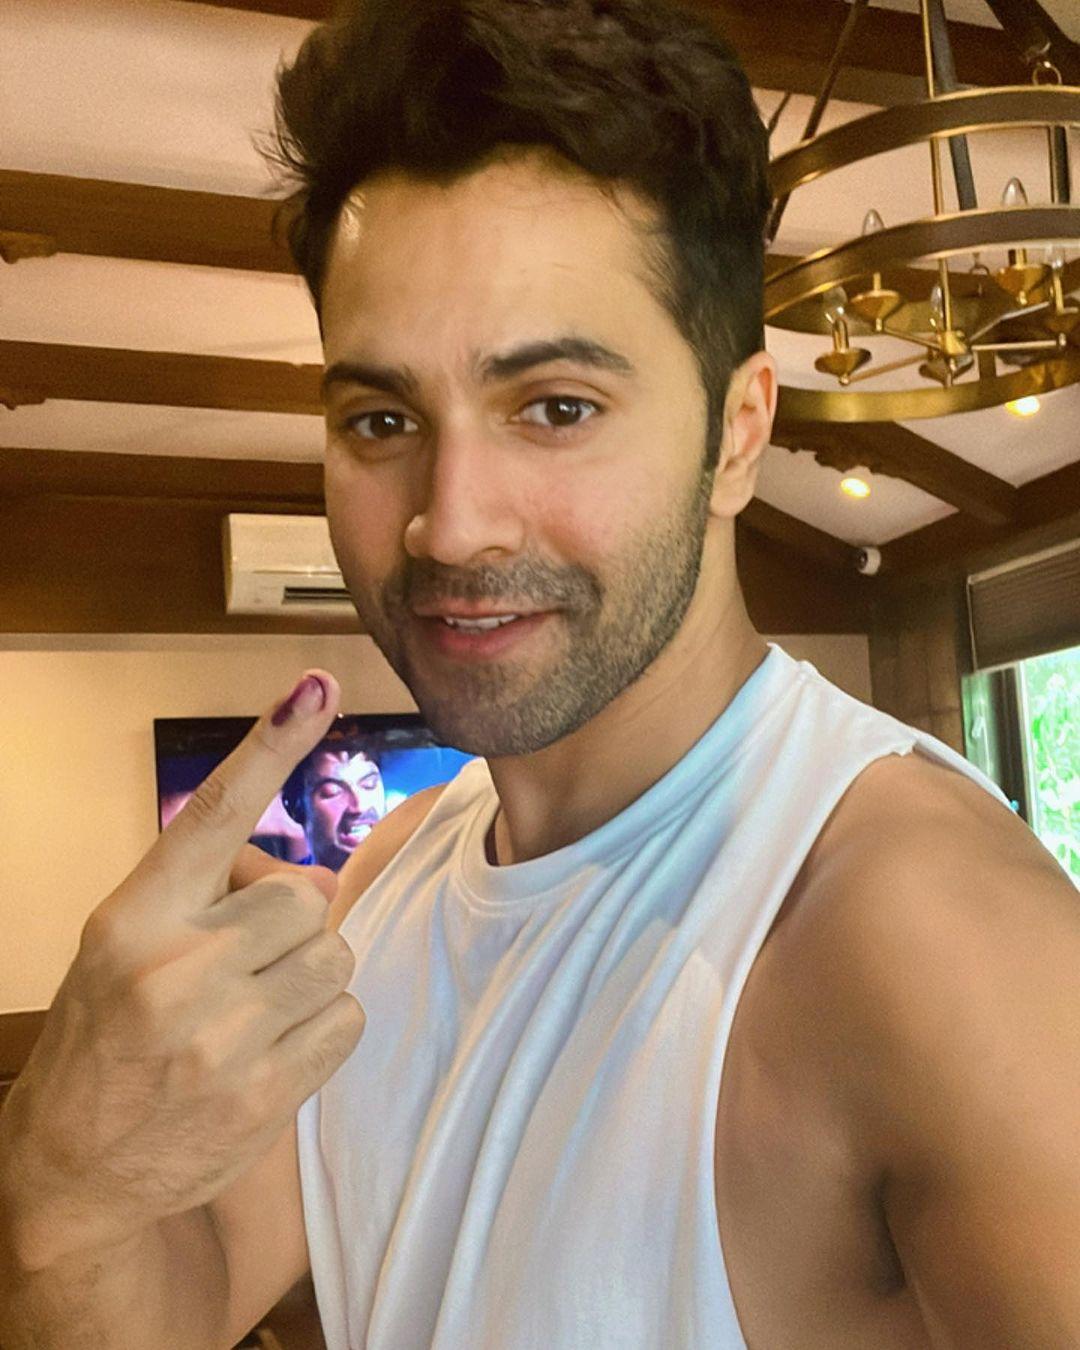 Varun Dhawan, who was snapped with his father David Dhawan at the polling booth, shared a selfie on his Instagram account